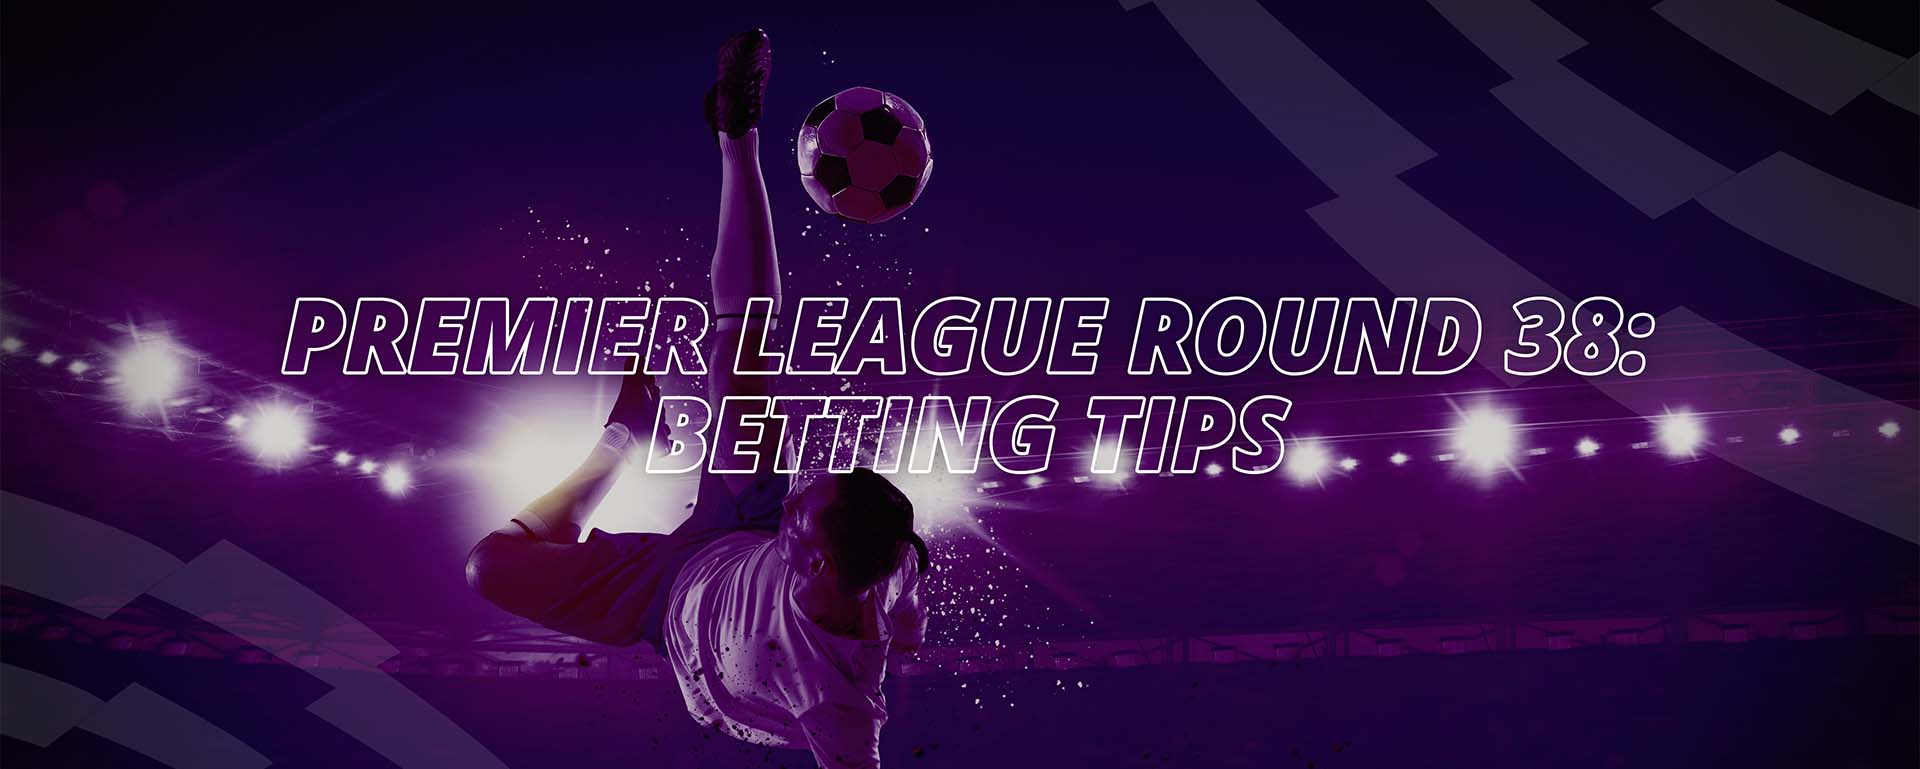 PREMIER LEAGUE ROUND 38: BETTING TIPS